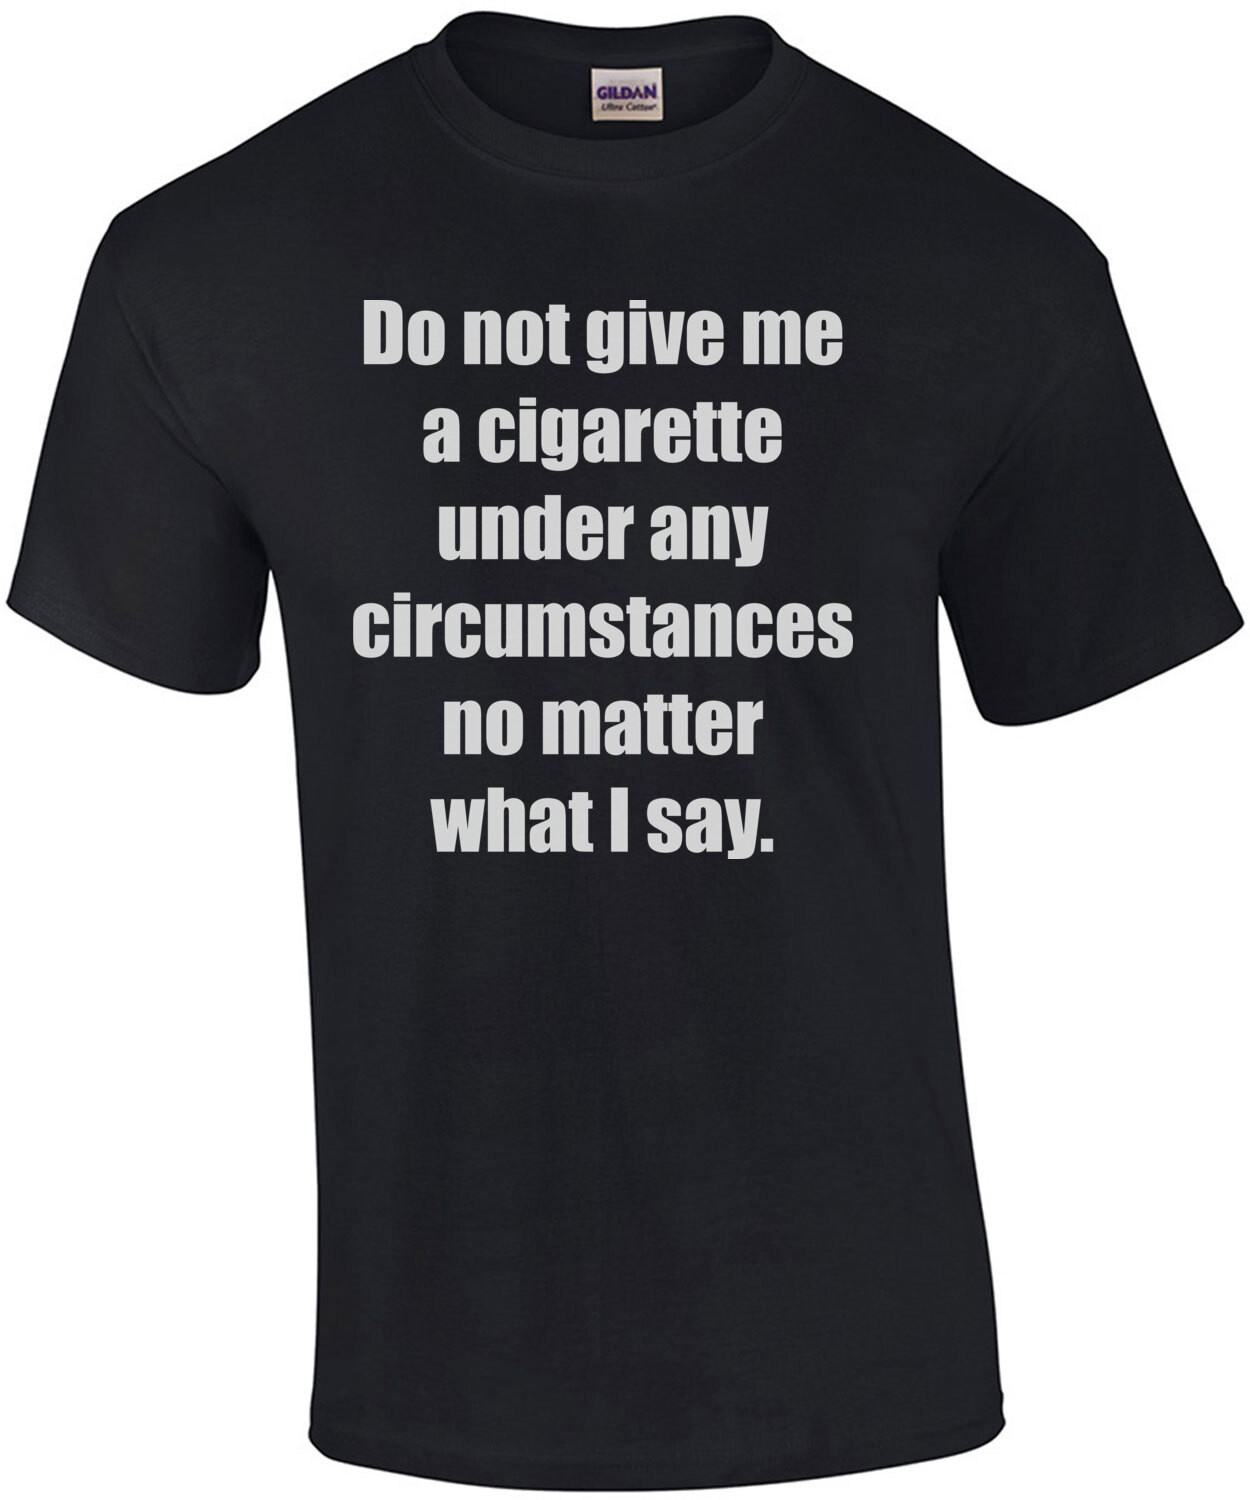 Do not give me a cigarette under any circumstances no matter what I say. Quit Cigarettes - Quit Smoking T-Shirt